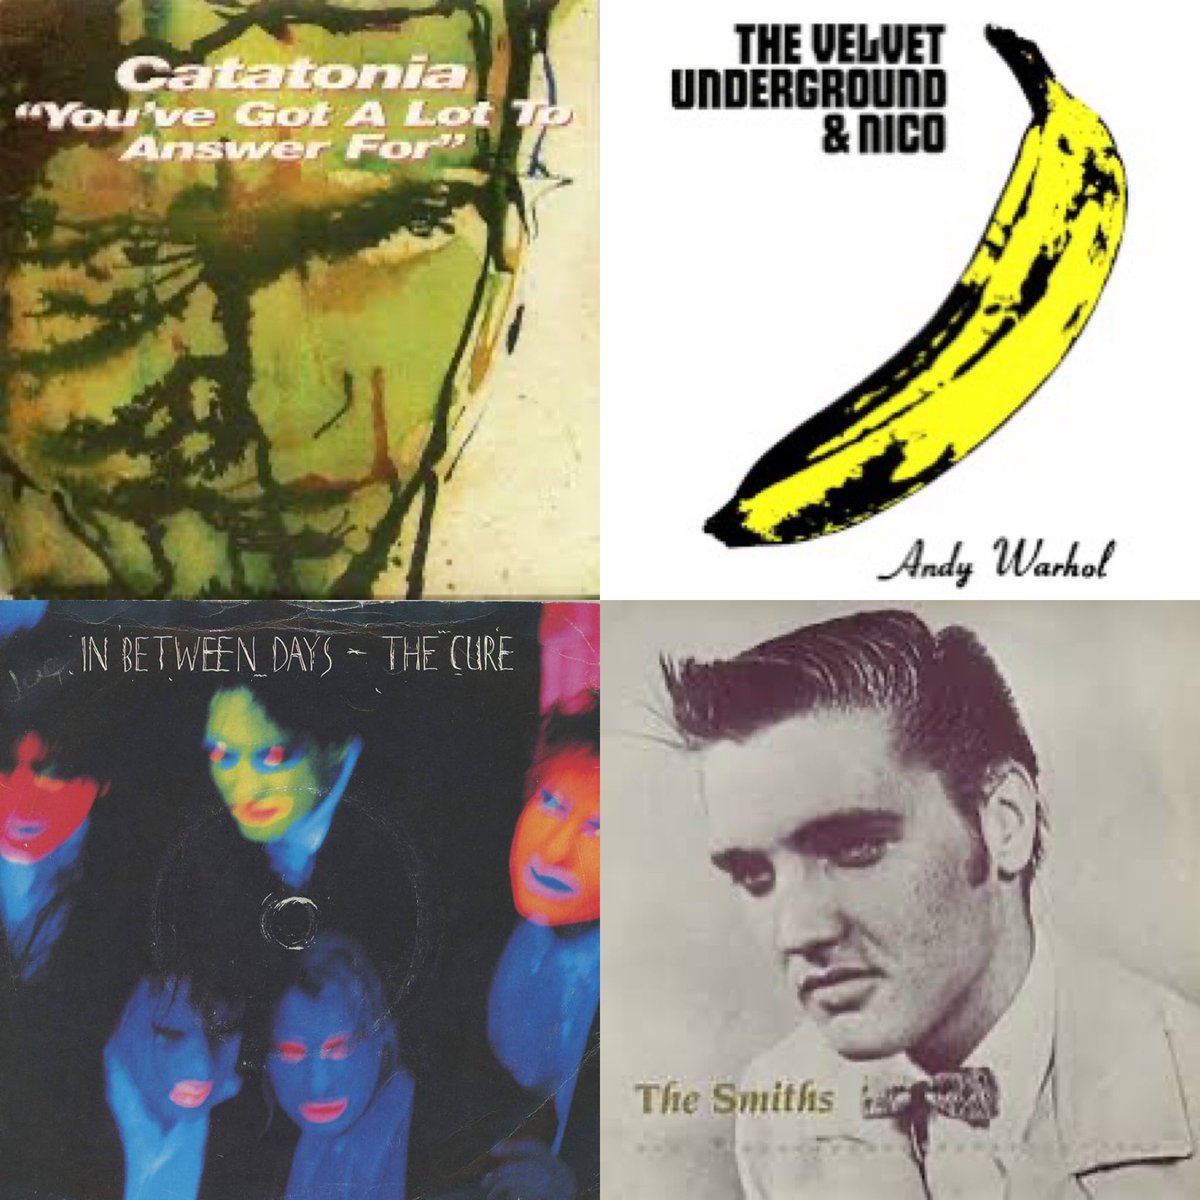 More of @BPete1970's for my Indie Brunch this Saturday on @louderthanwar ... which album track? A-sides or B-sides? Find out tomorrow @cerysmatthews @thecure #thesmiths #velvetunderground @Johnny_Marr @therealjohncale @catatoniaband